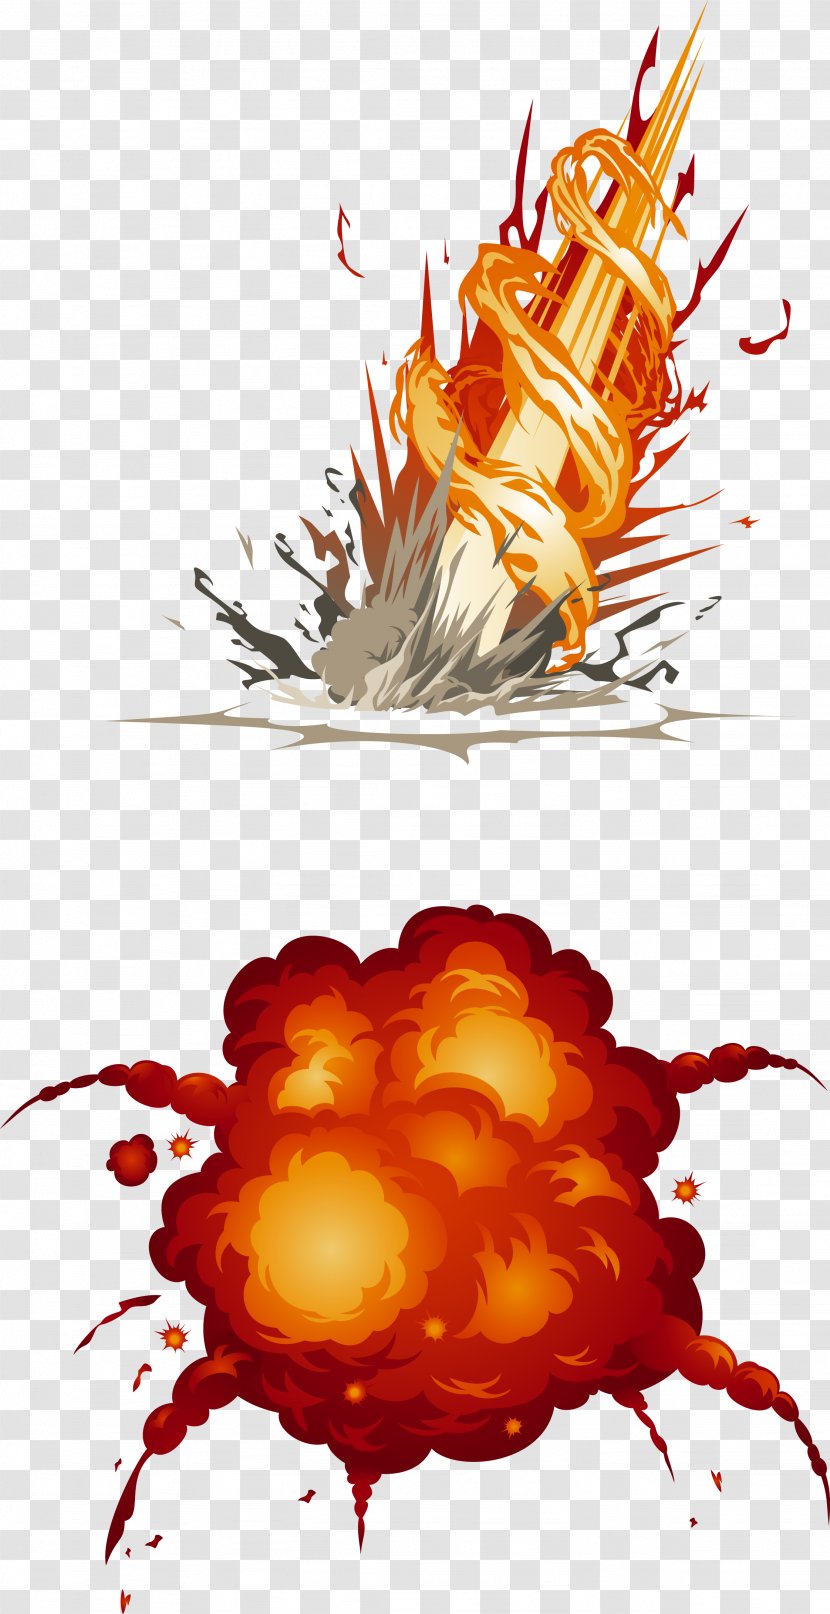 Explosion Animation Download - Pixel - Explosions Transparent PNG